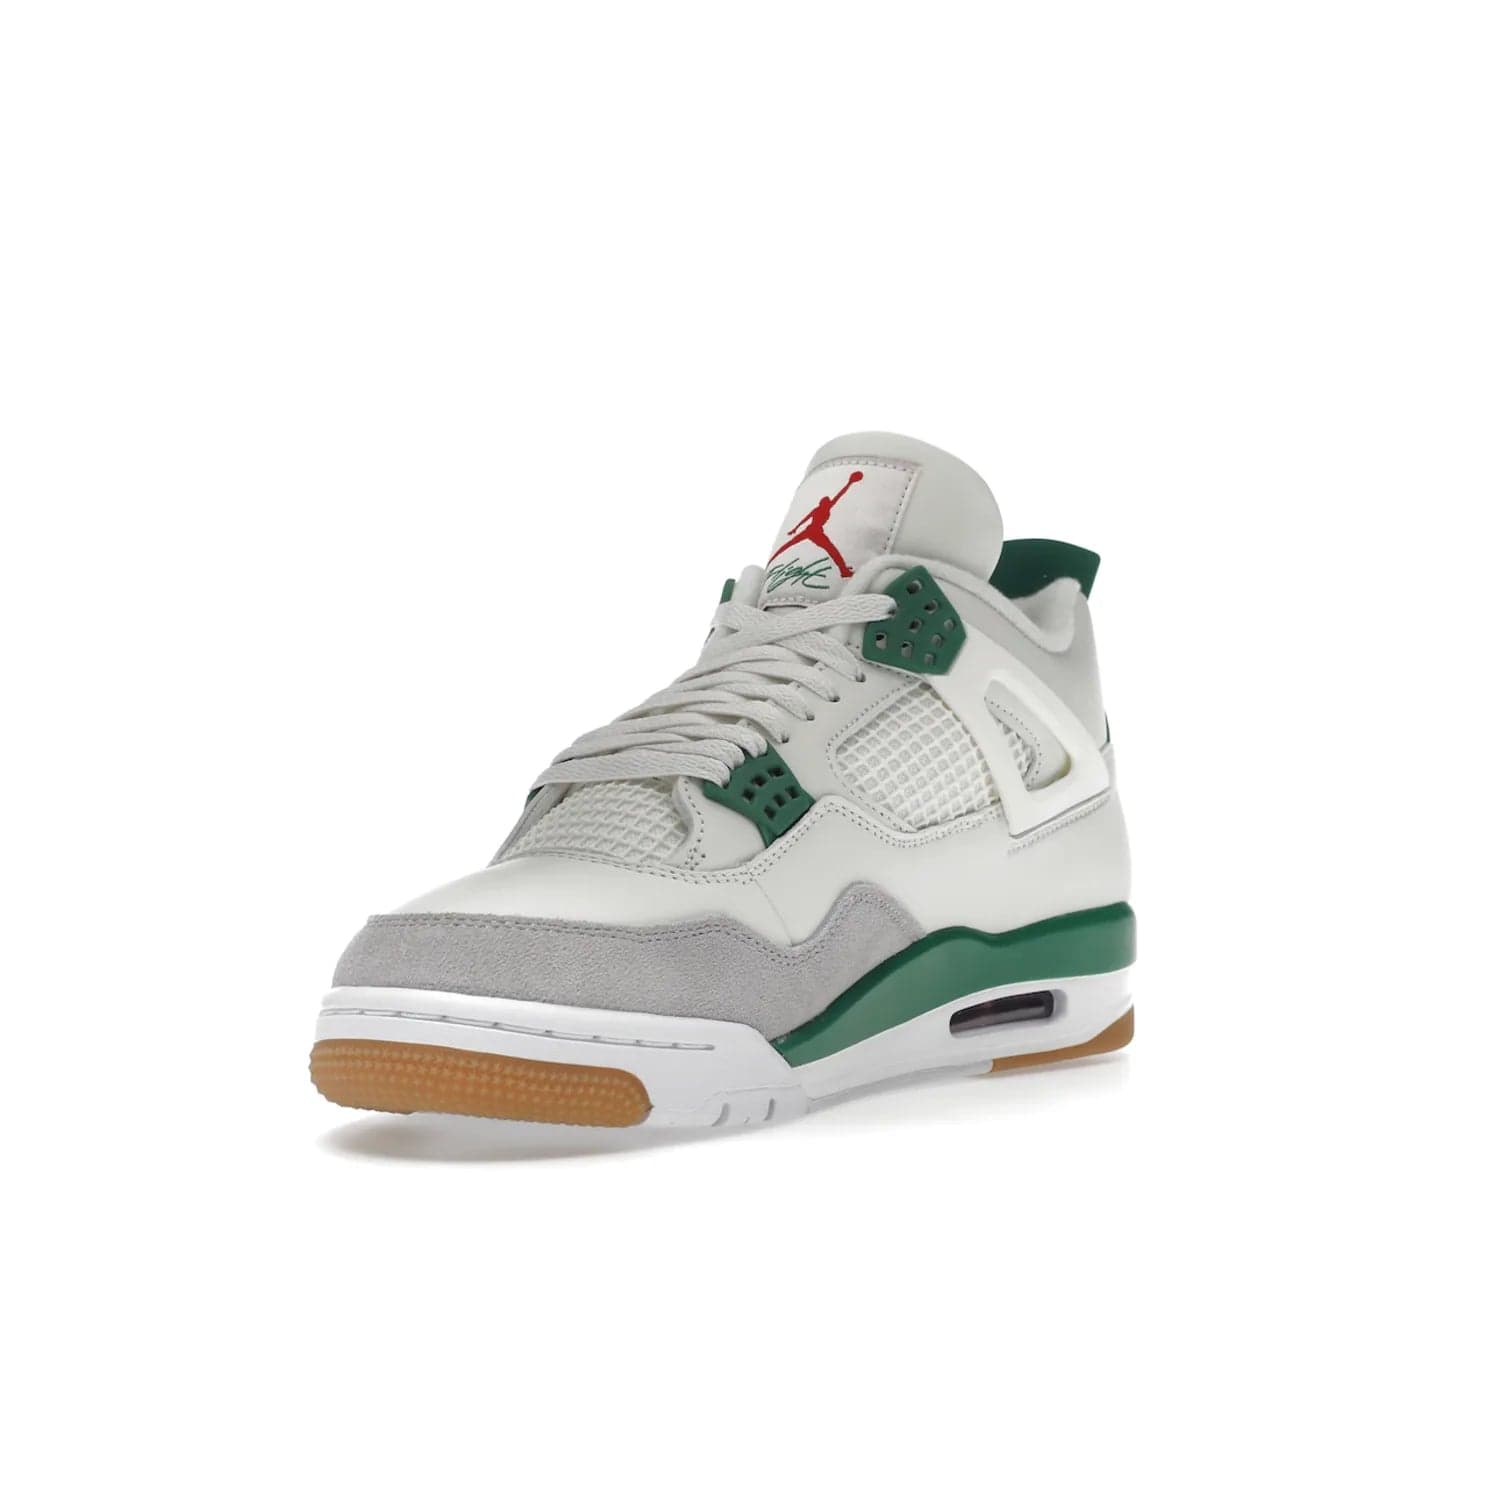 Jordan 4 Retro SB Pine Green - Image 14 - Only at www.BallersClubKickz.com - A white leather upper combined with a Neutral Grey suede mudguard gives this limited Air Jordan 4 Retro SB Pine Green sneaker its unmistakable style. Released March 20, 2023, the Jordan 4 Retro SB features a white and Pine Green midsole plus a red air unit with a gum outsole for grip. The perfect blend of Nike SB skateboarding and Jordan 4 classic design.